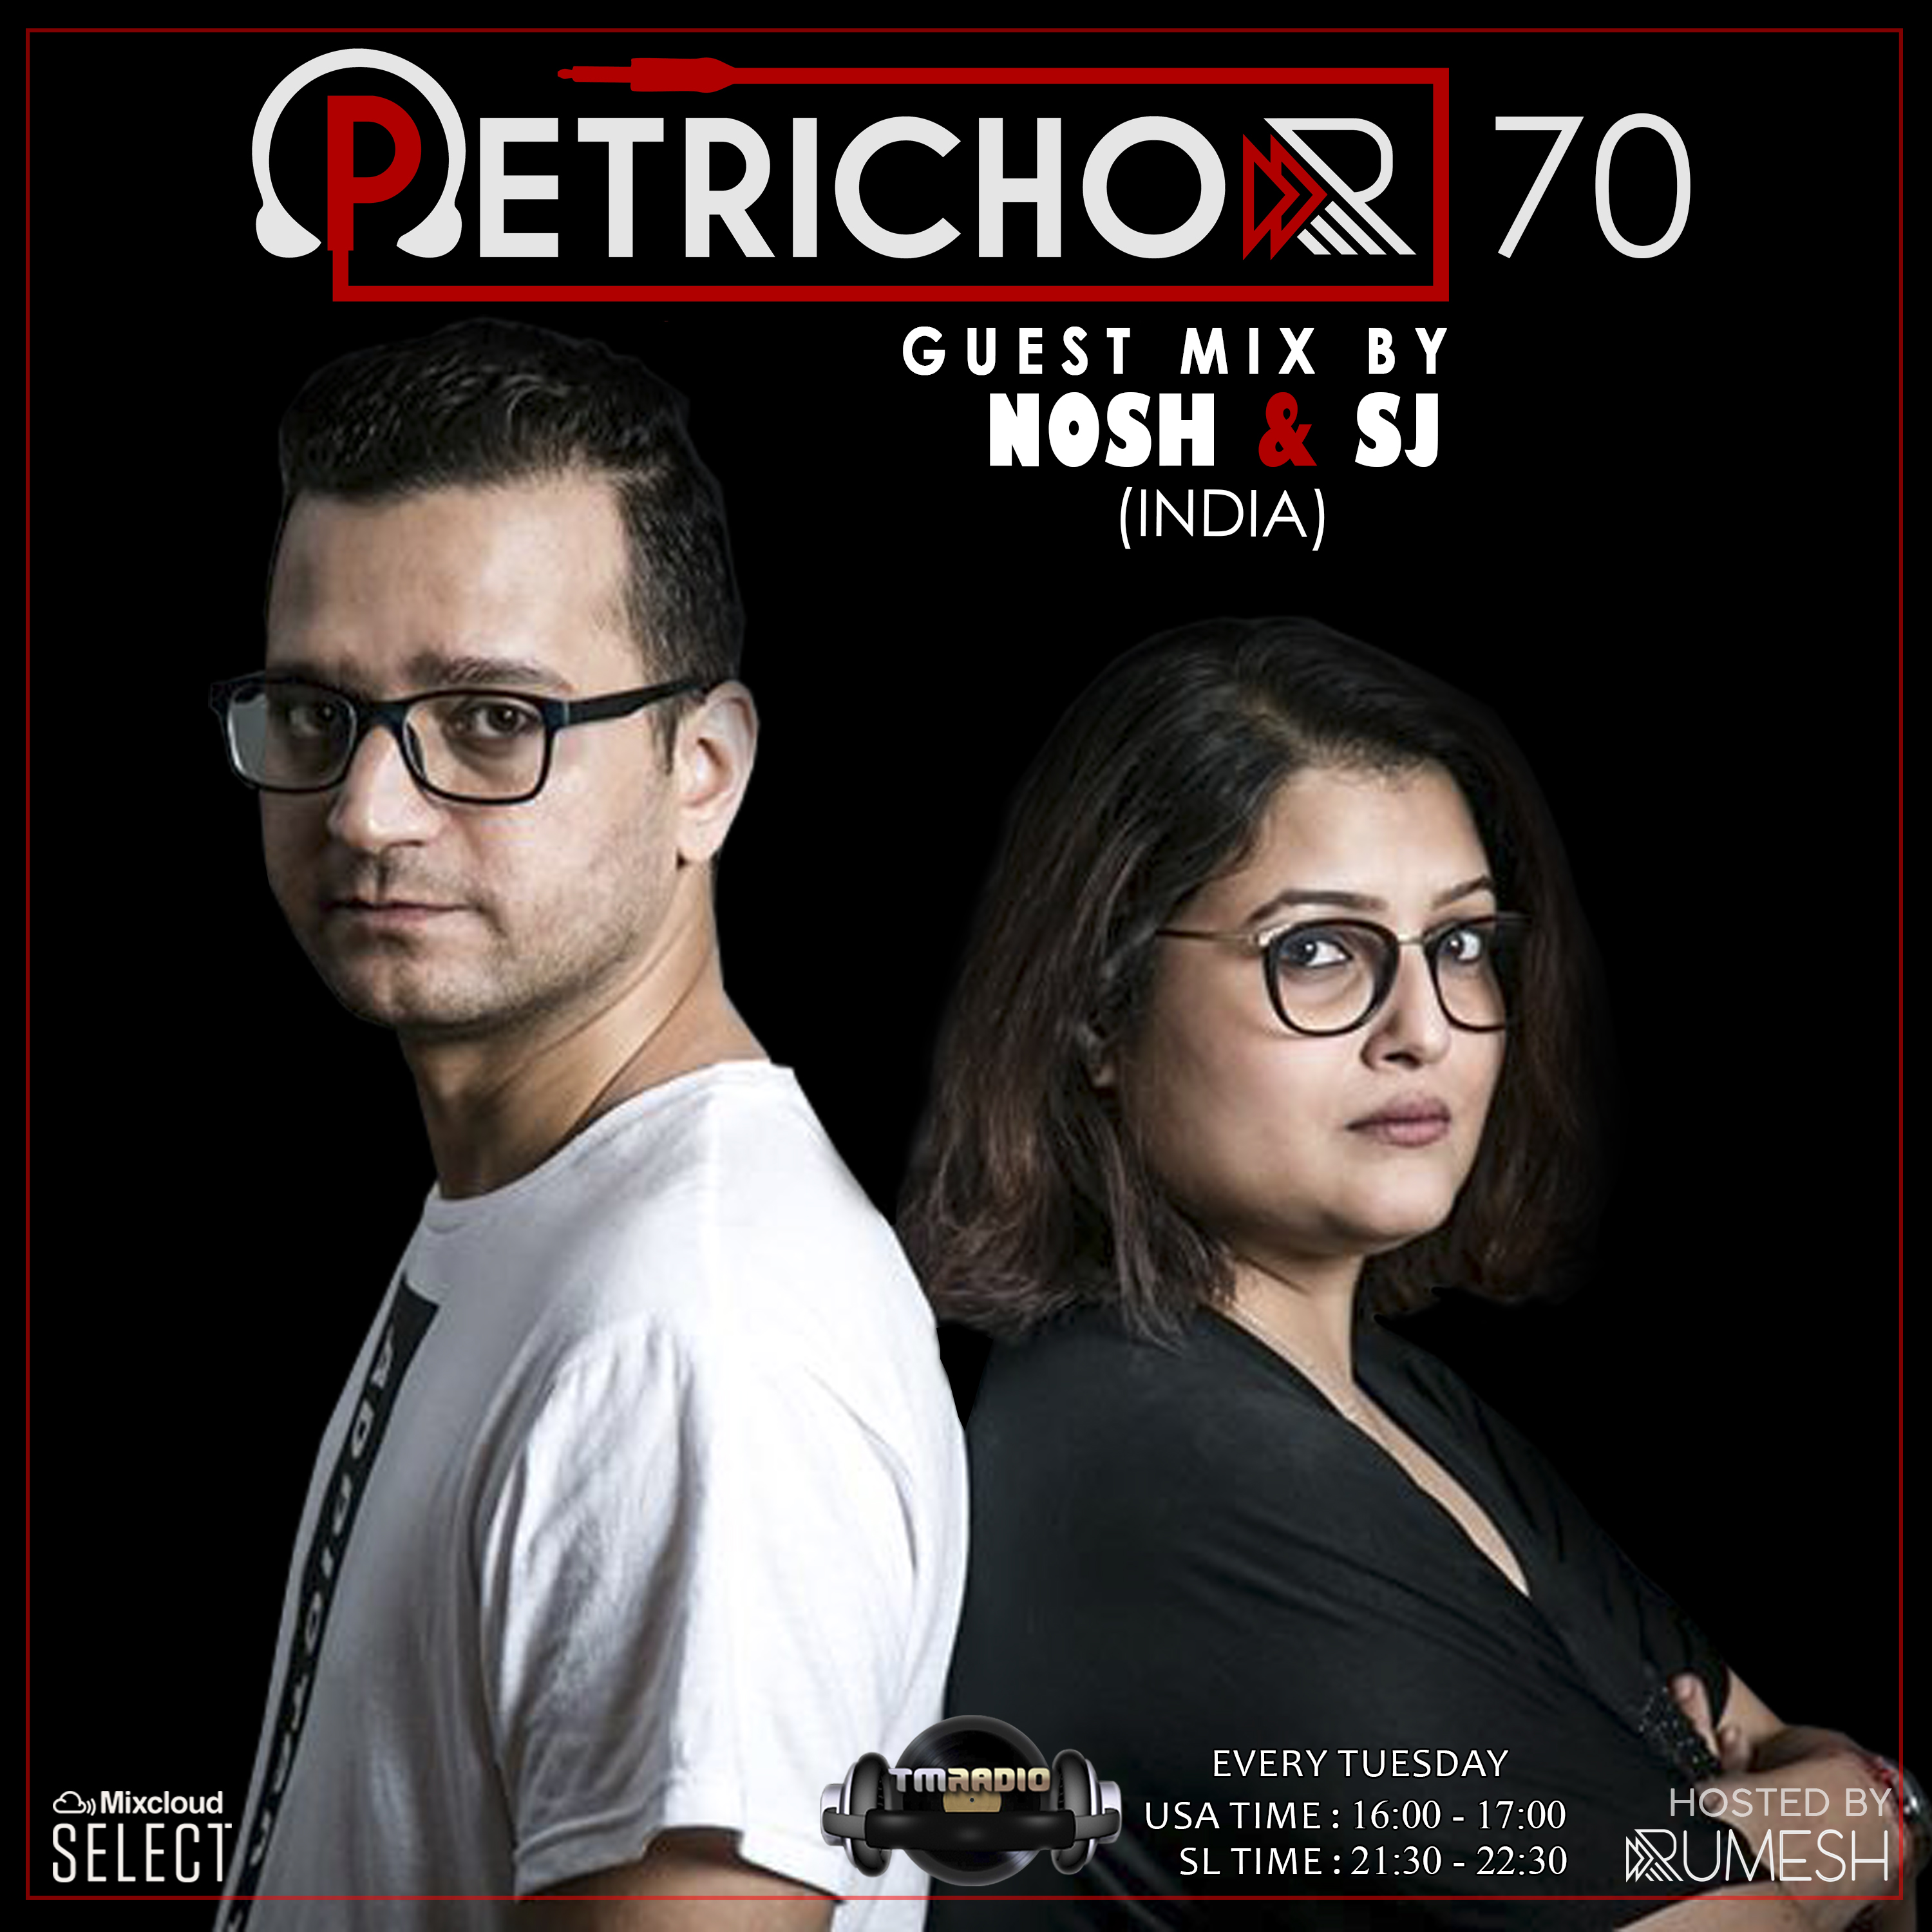 Petrichor :: Petrichor 70 Guest Mix by Nosh & SJ (India) (aired on March 10th, 2020) banner logo